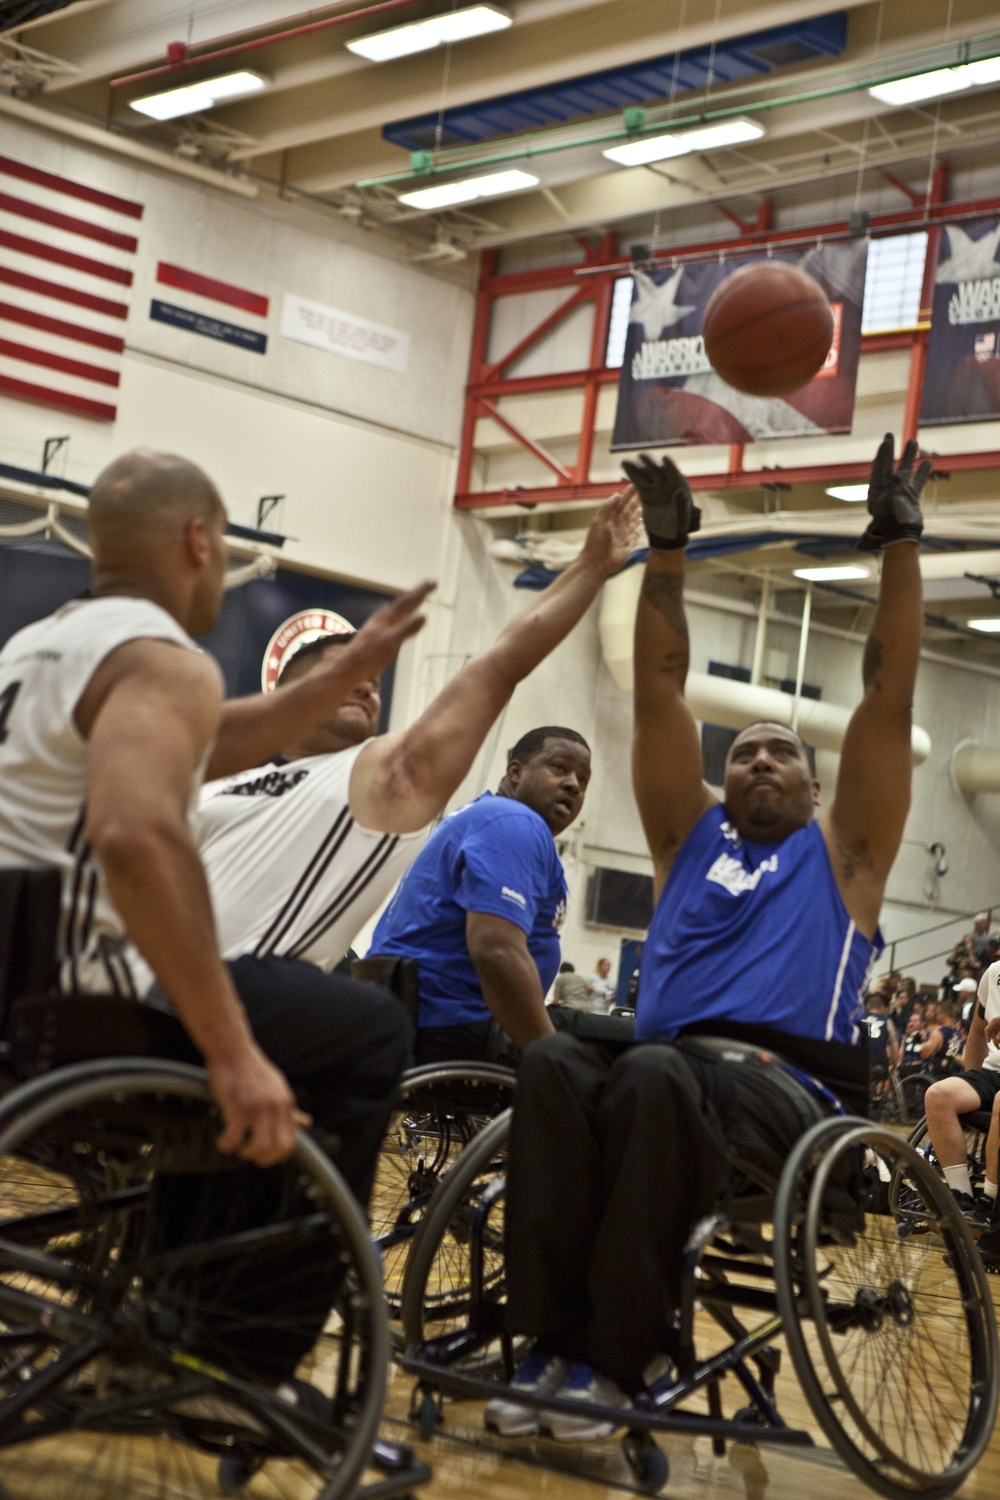 Air Force best Special Operations in first wheel chair basketball